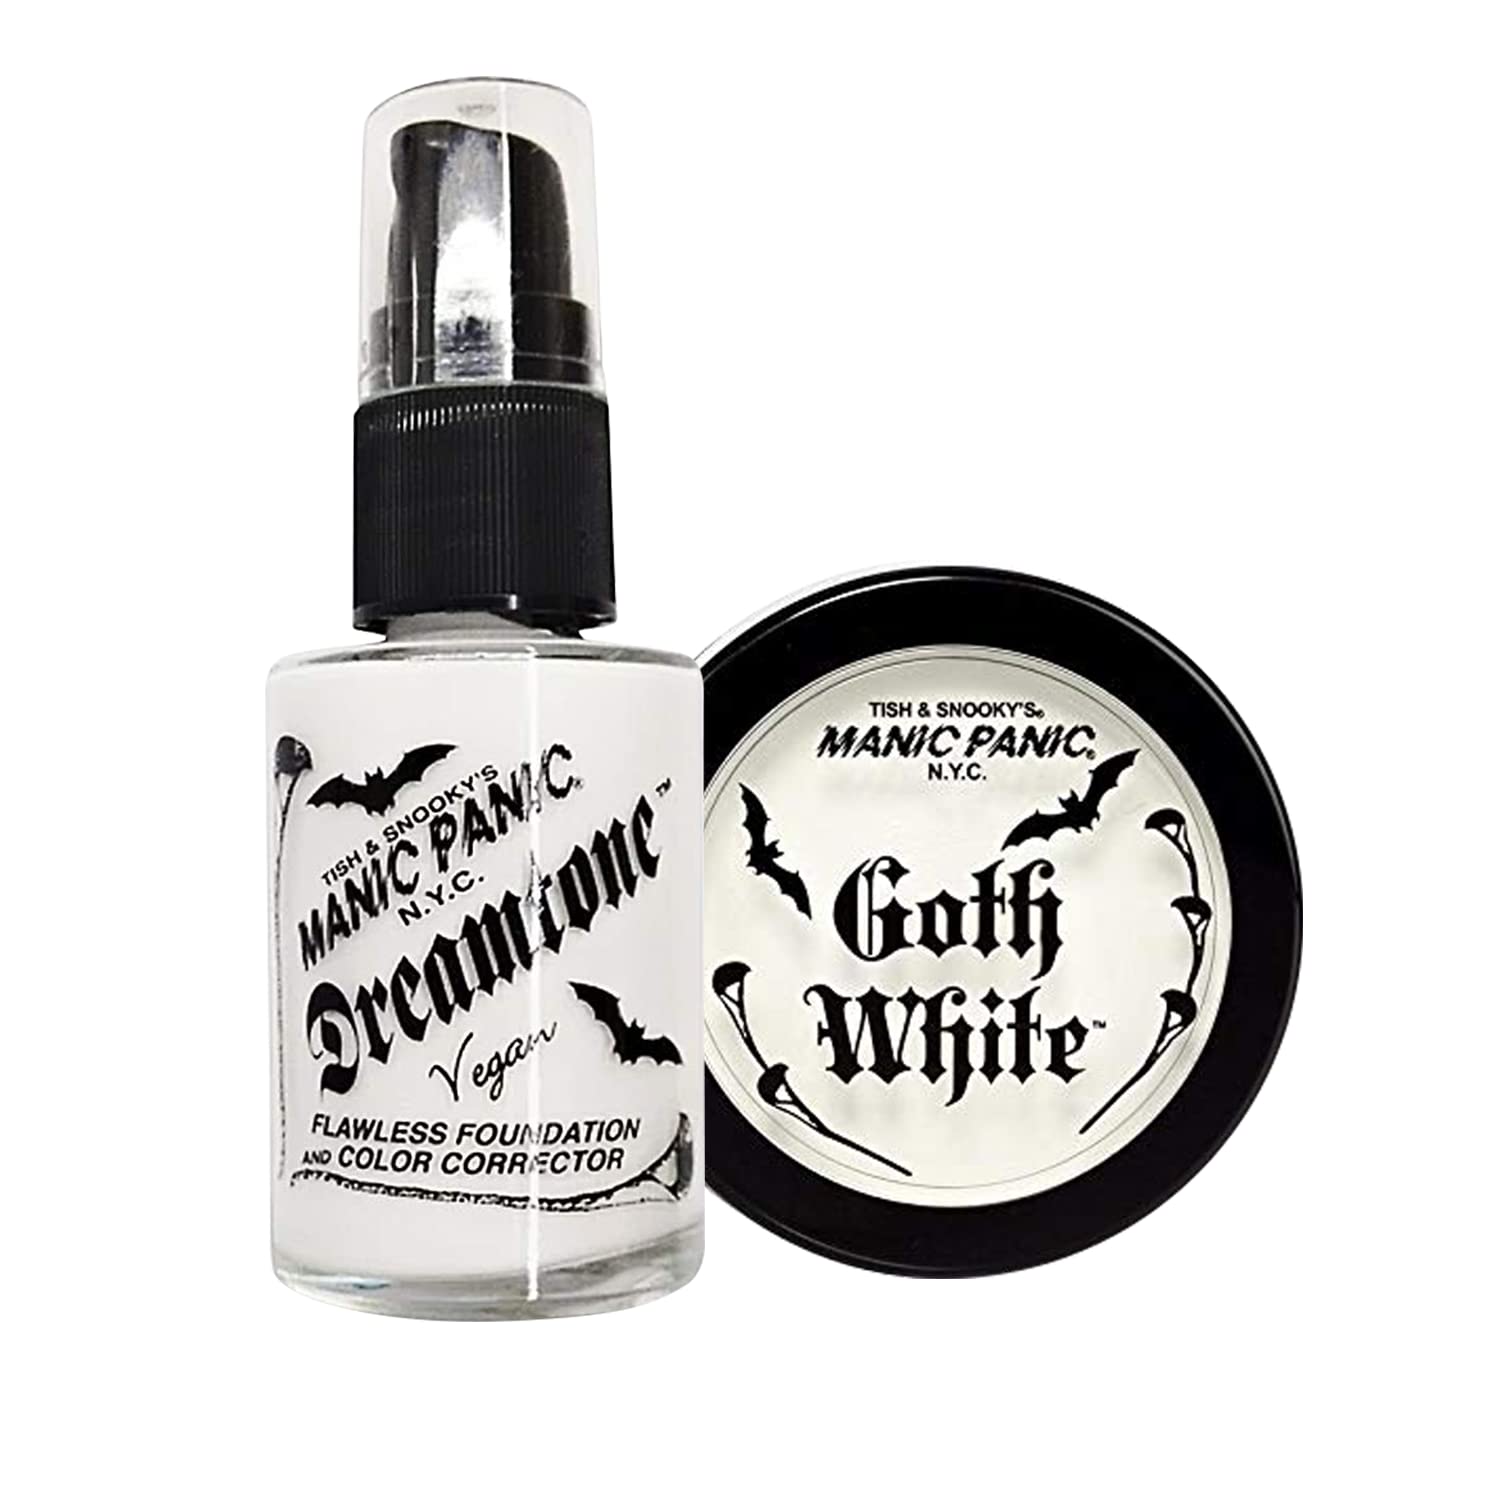 Goth White Cream/Powder Foundation by Manic Panic – Another Way of Life